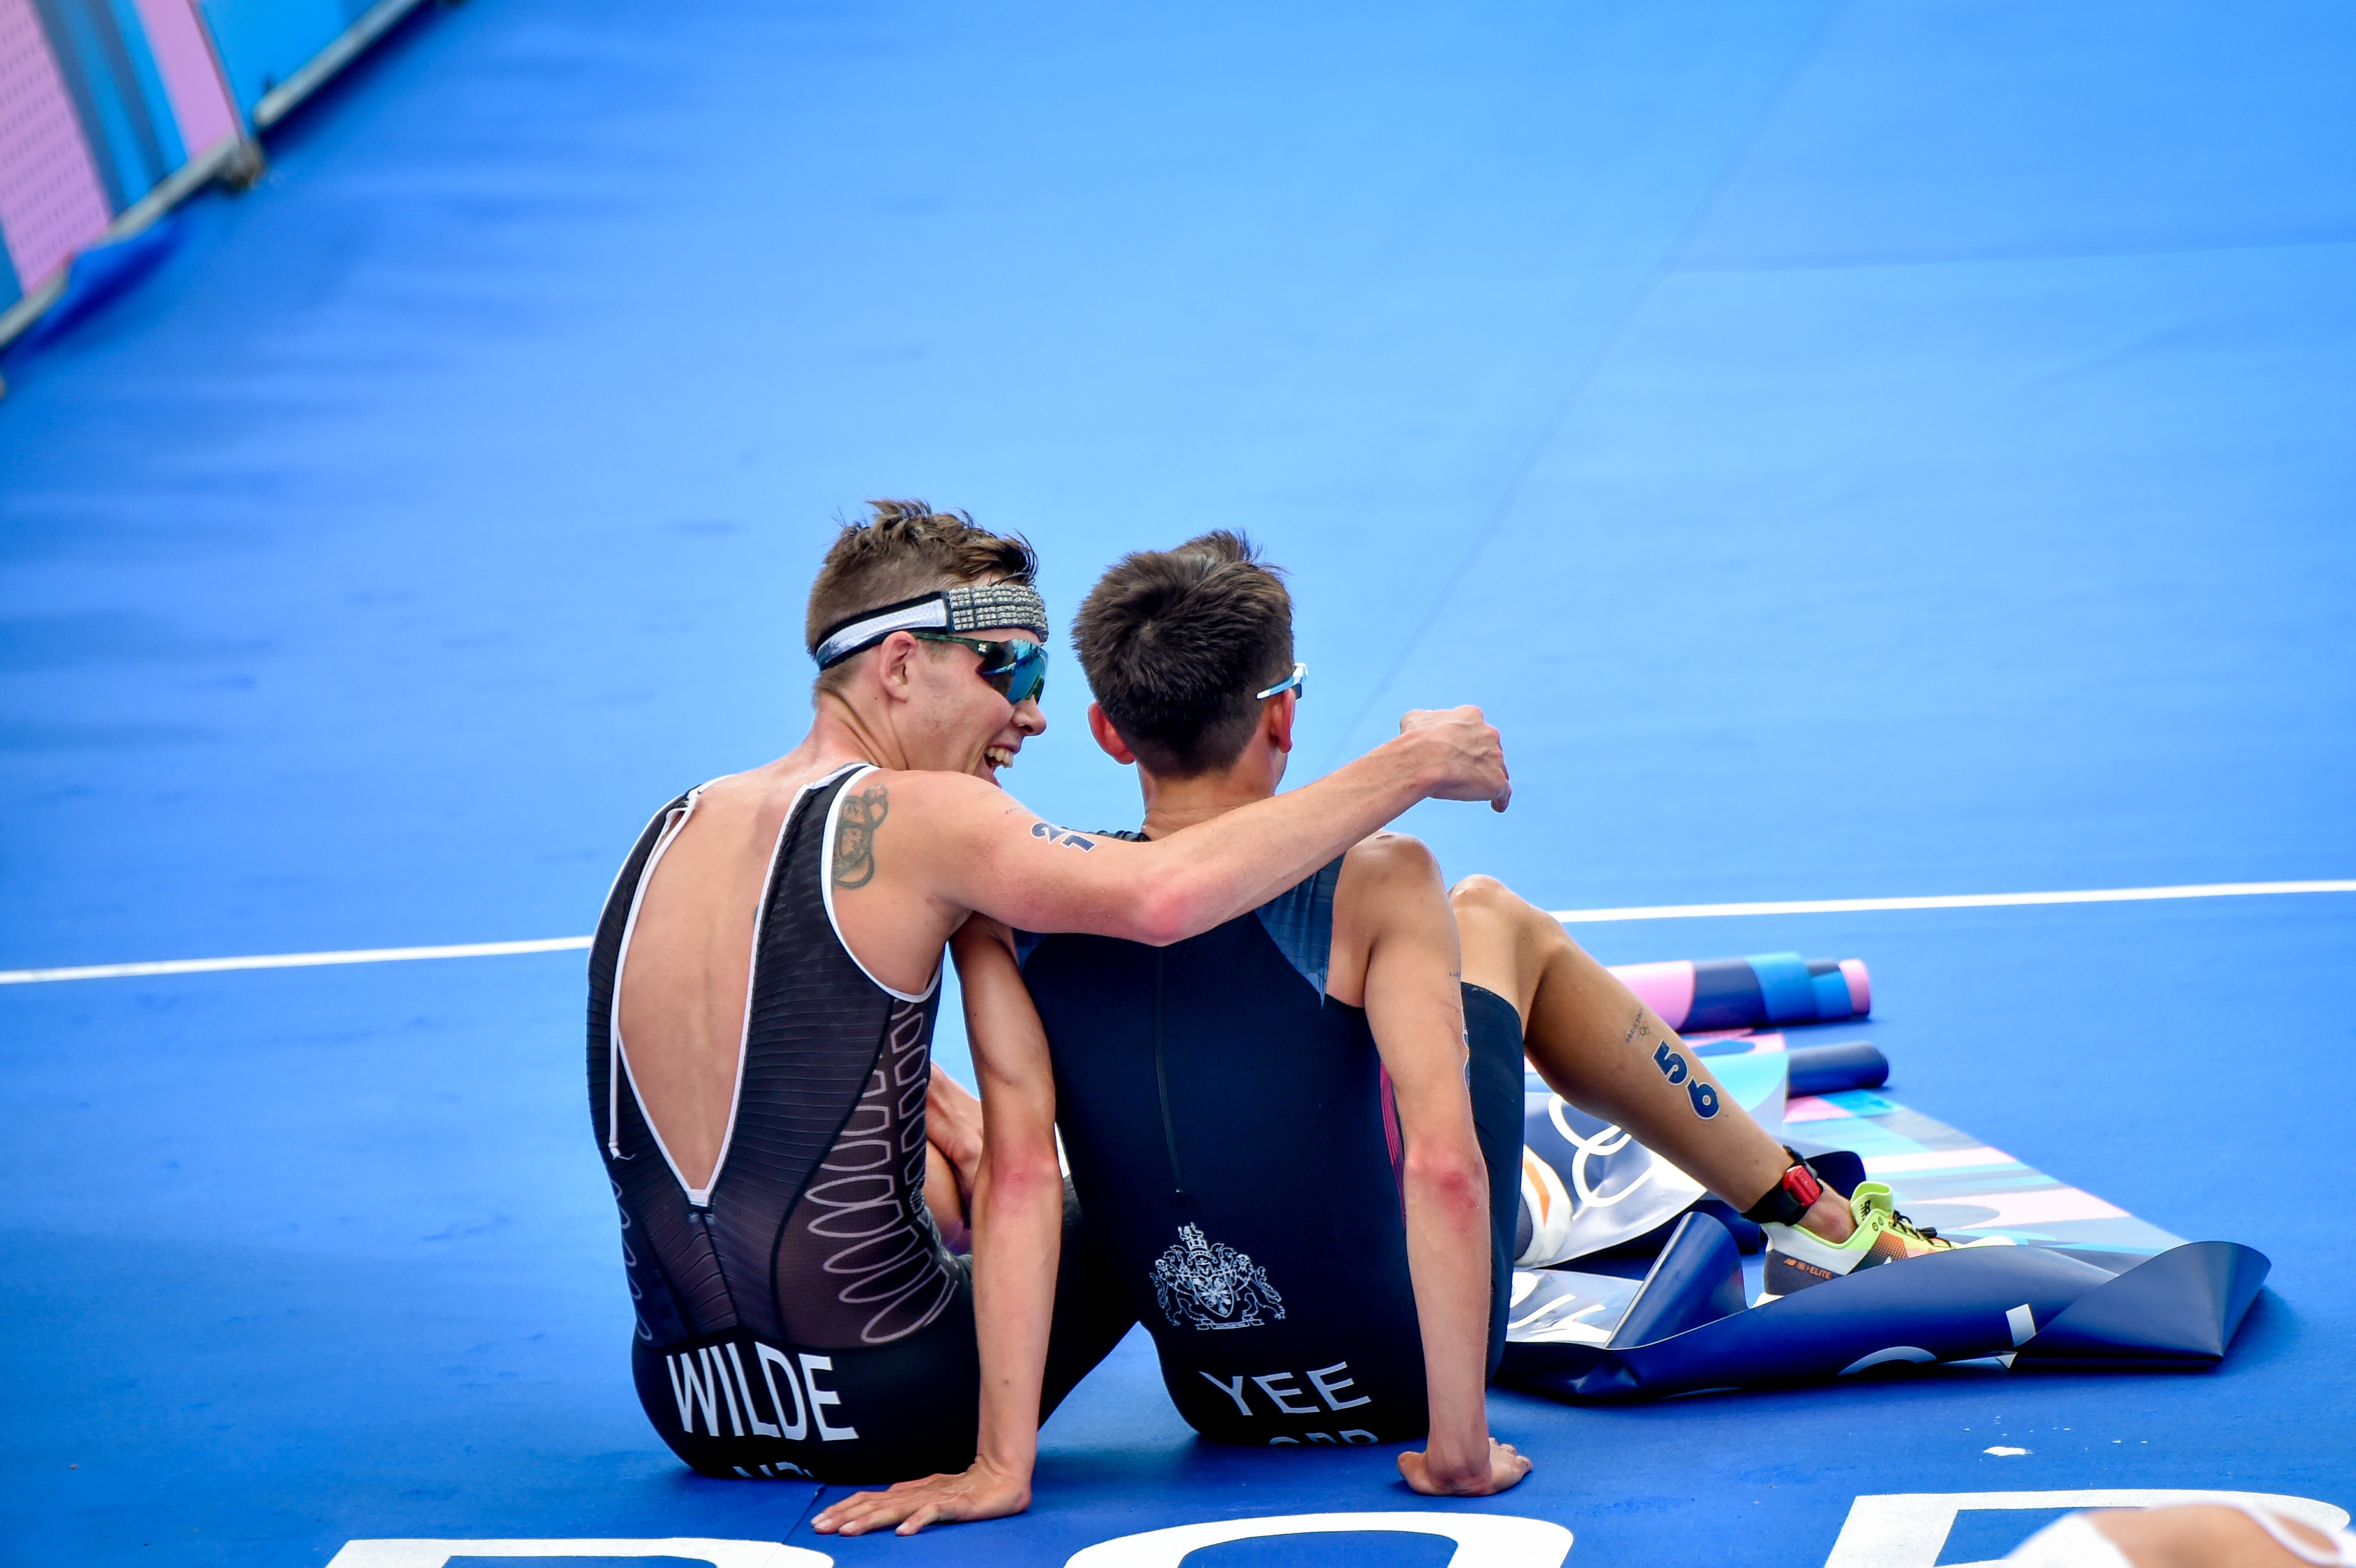 Yee and Wilde at finish